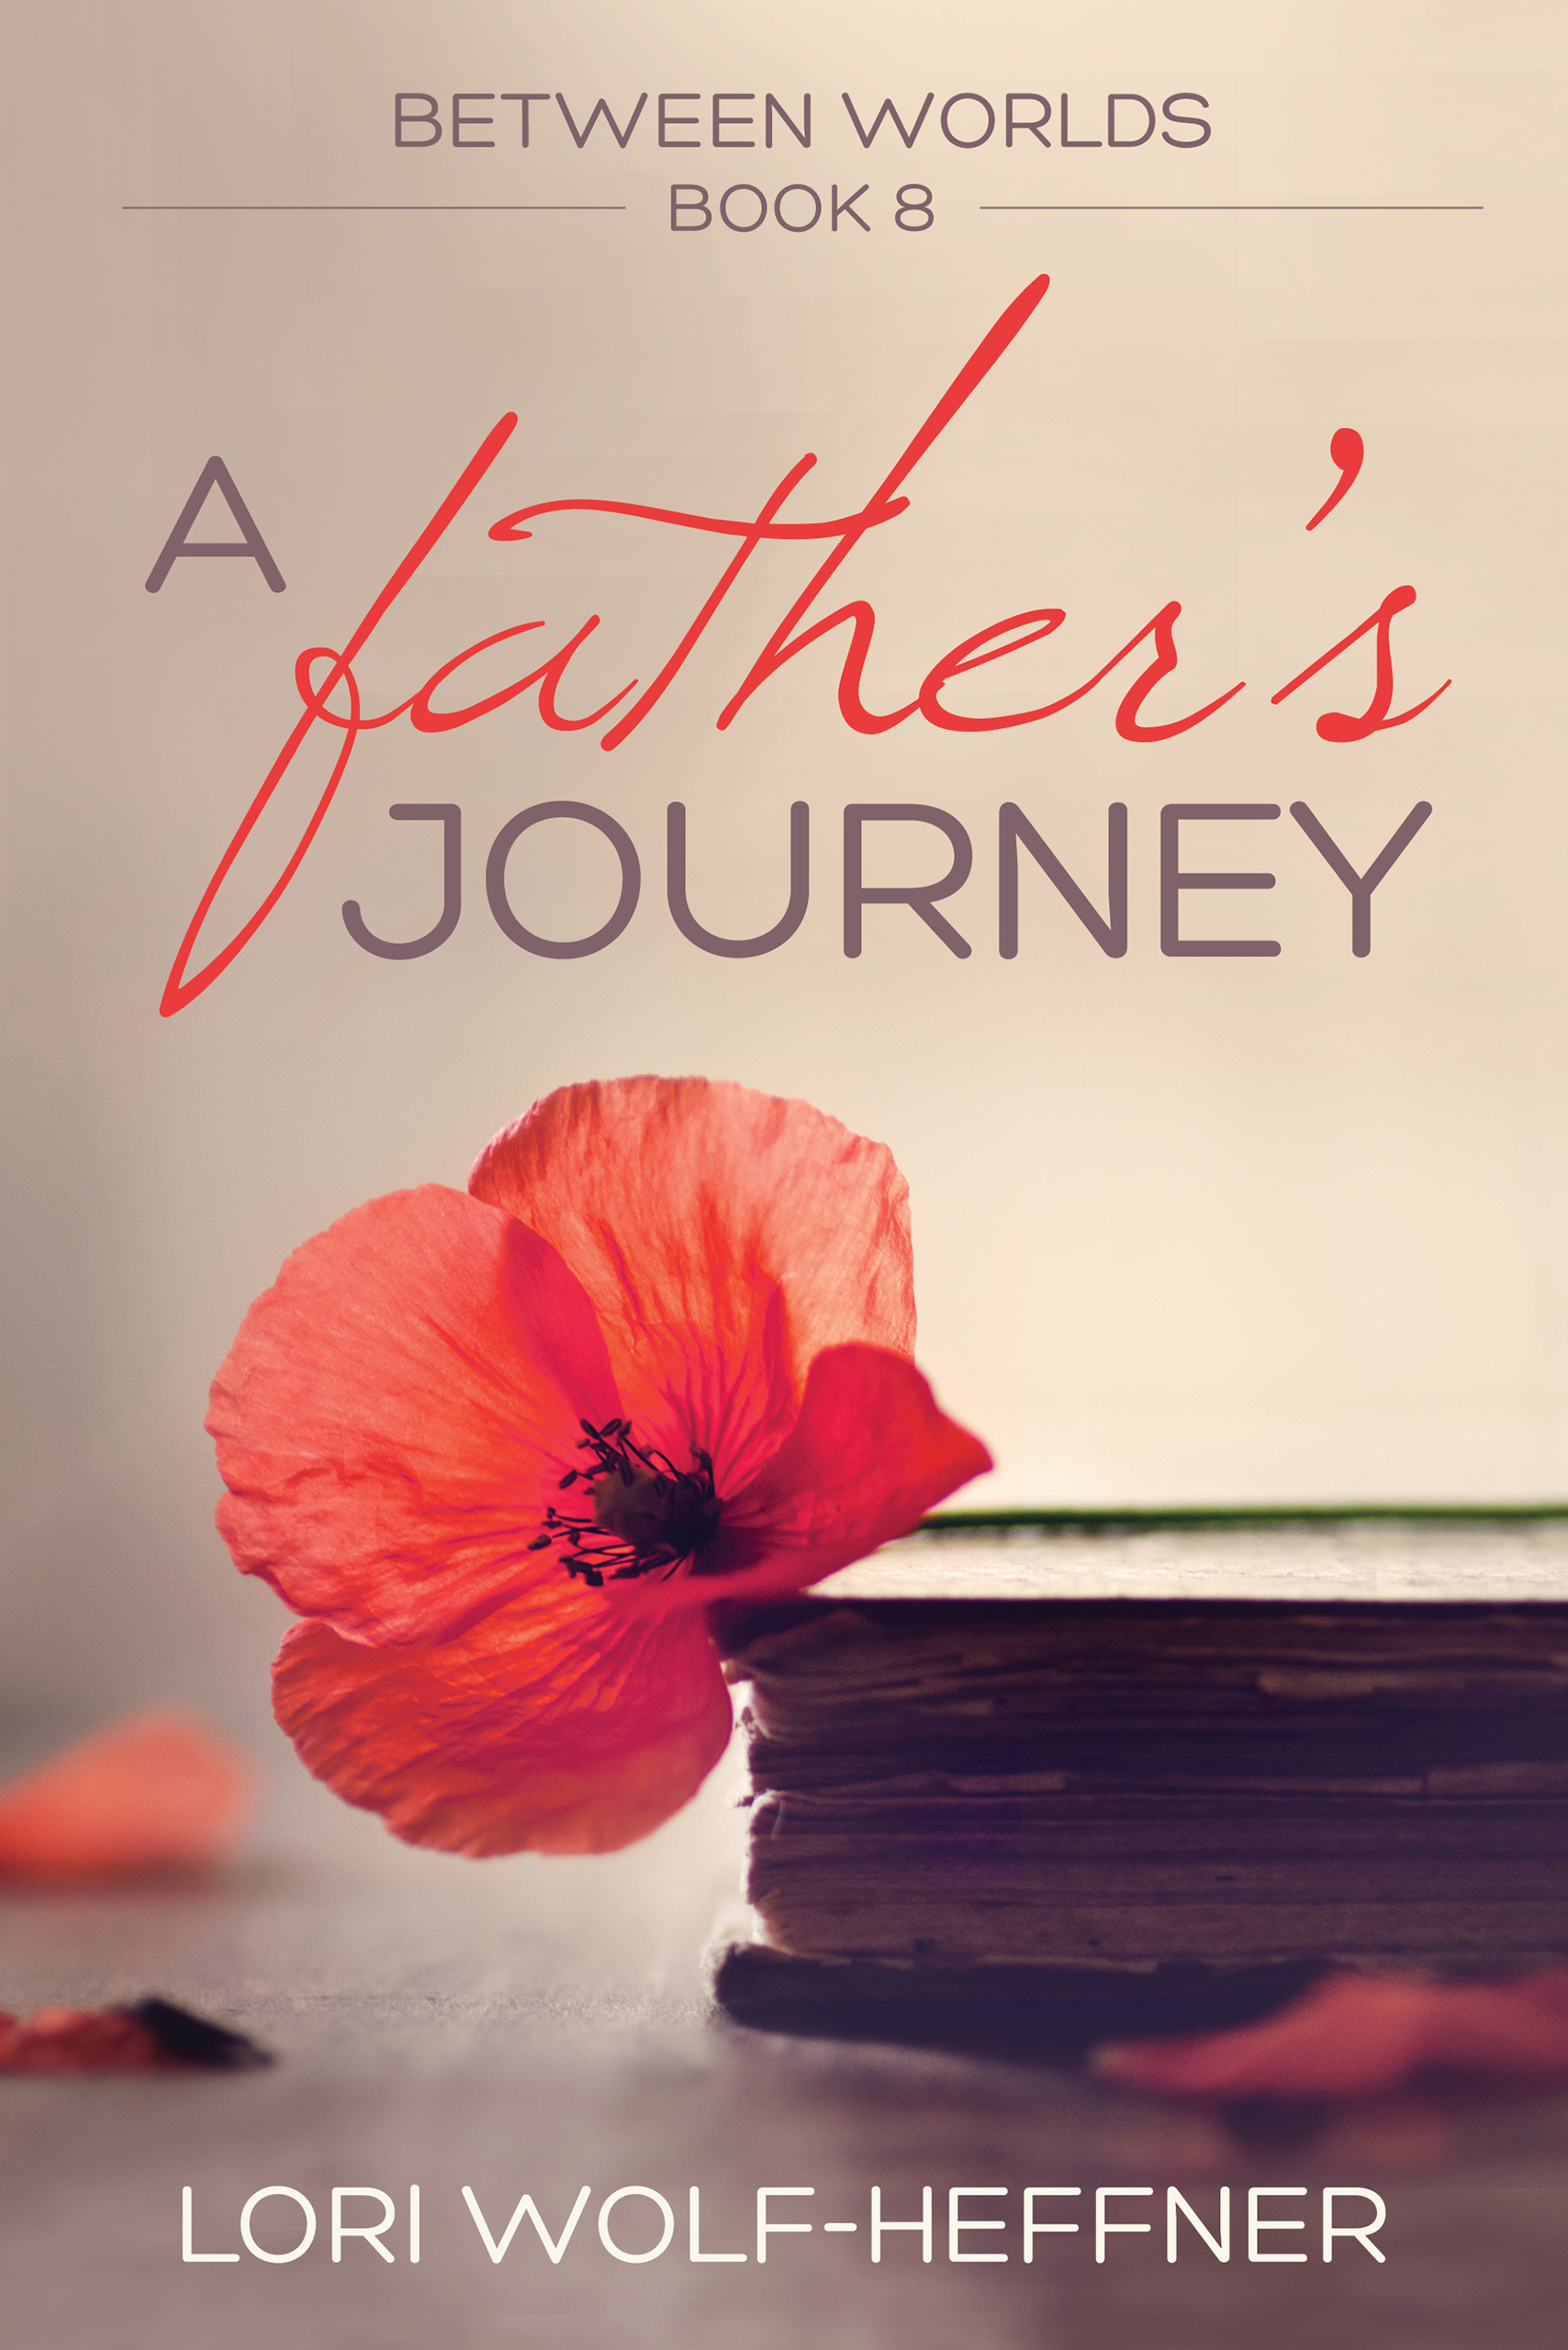 Book cover for Between Worlds 8: A Father's Journey, by Lori Wolf-Heffner